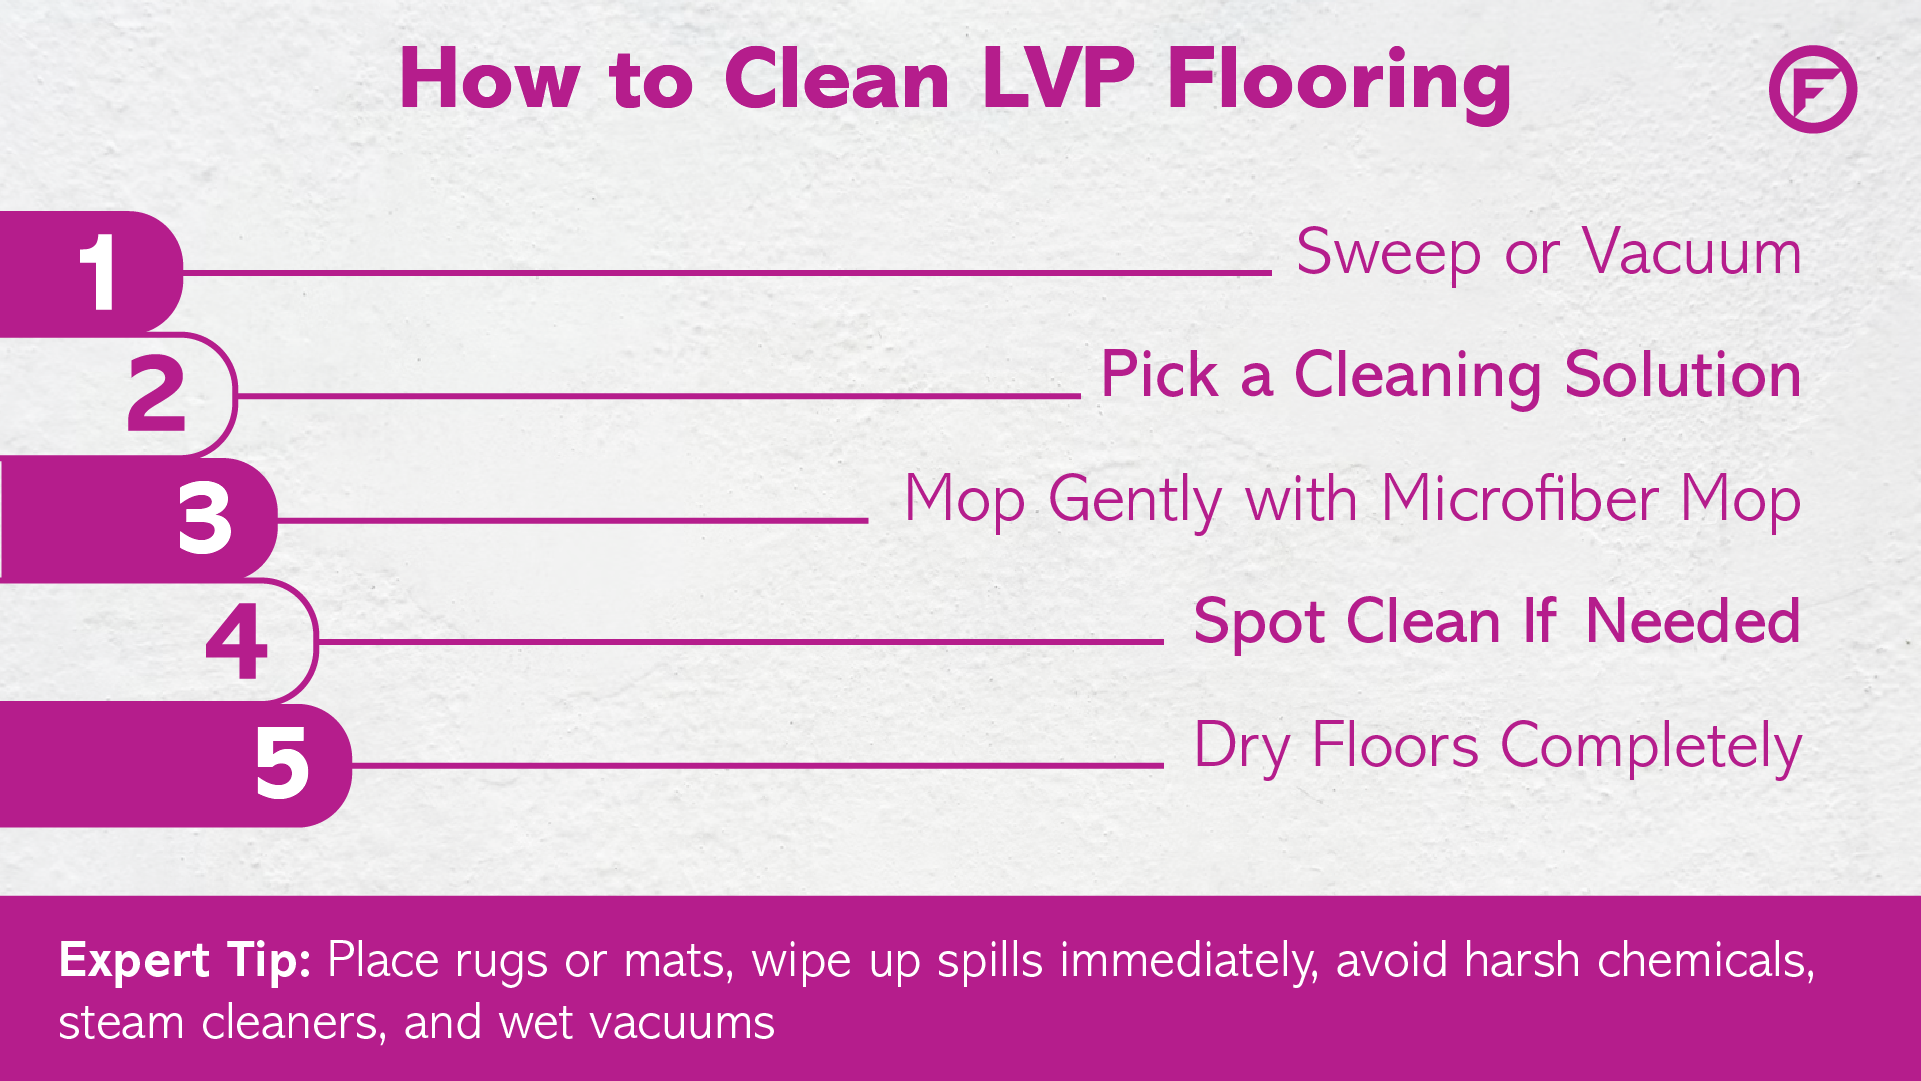 How to Take Care of and Clean Your New Luxury Vinyl Flooring: Tips and  Recommendations